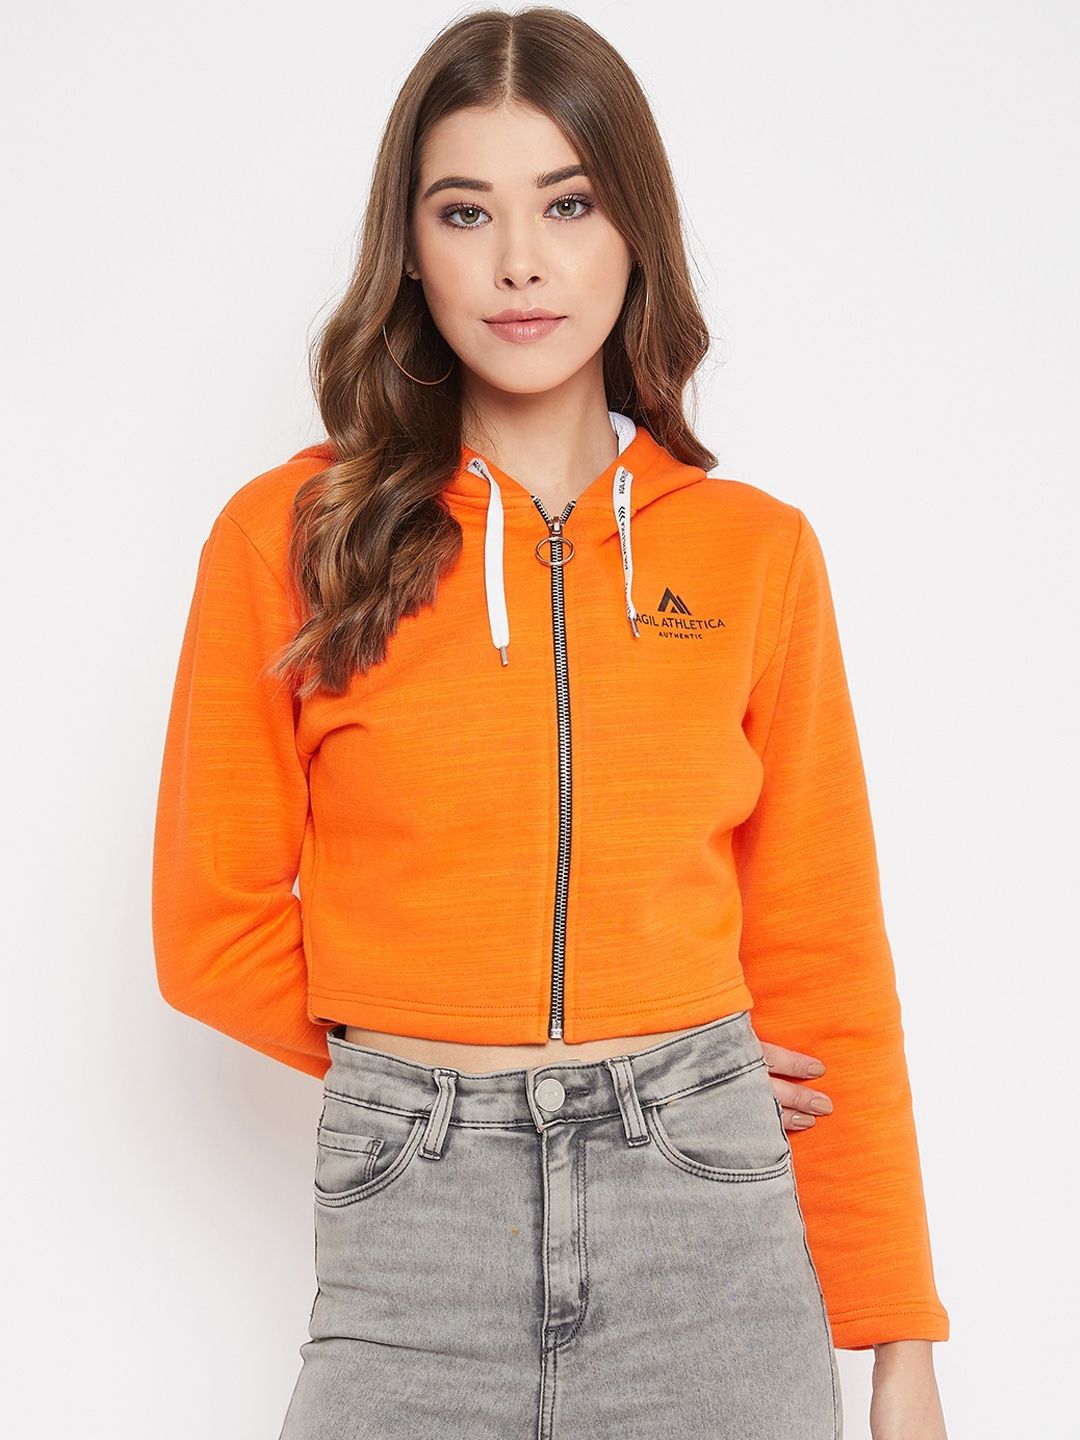 AGIL ATHLETICA Women Orange Solid Crop Tailored Jacket Price in India